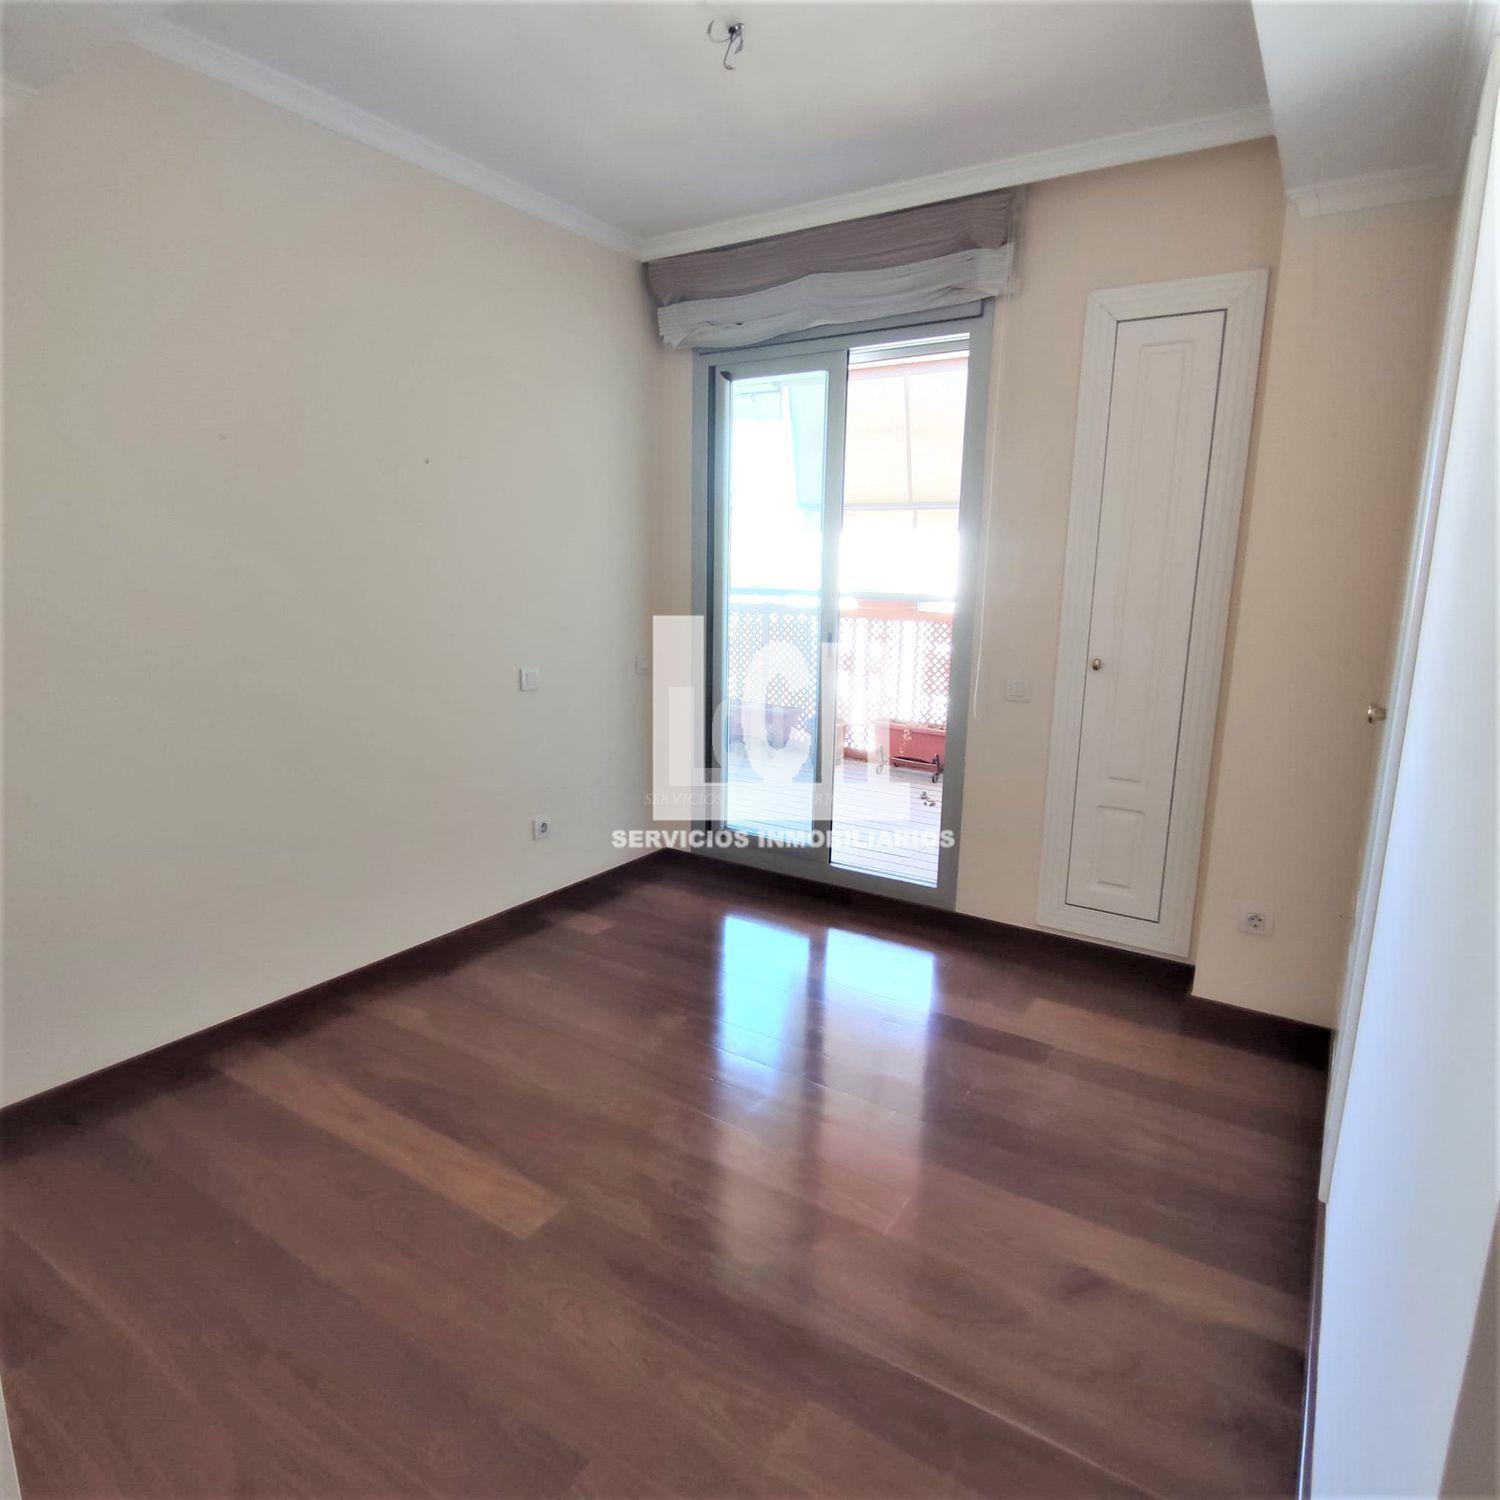 For rent of flat in València